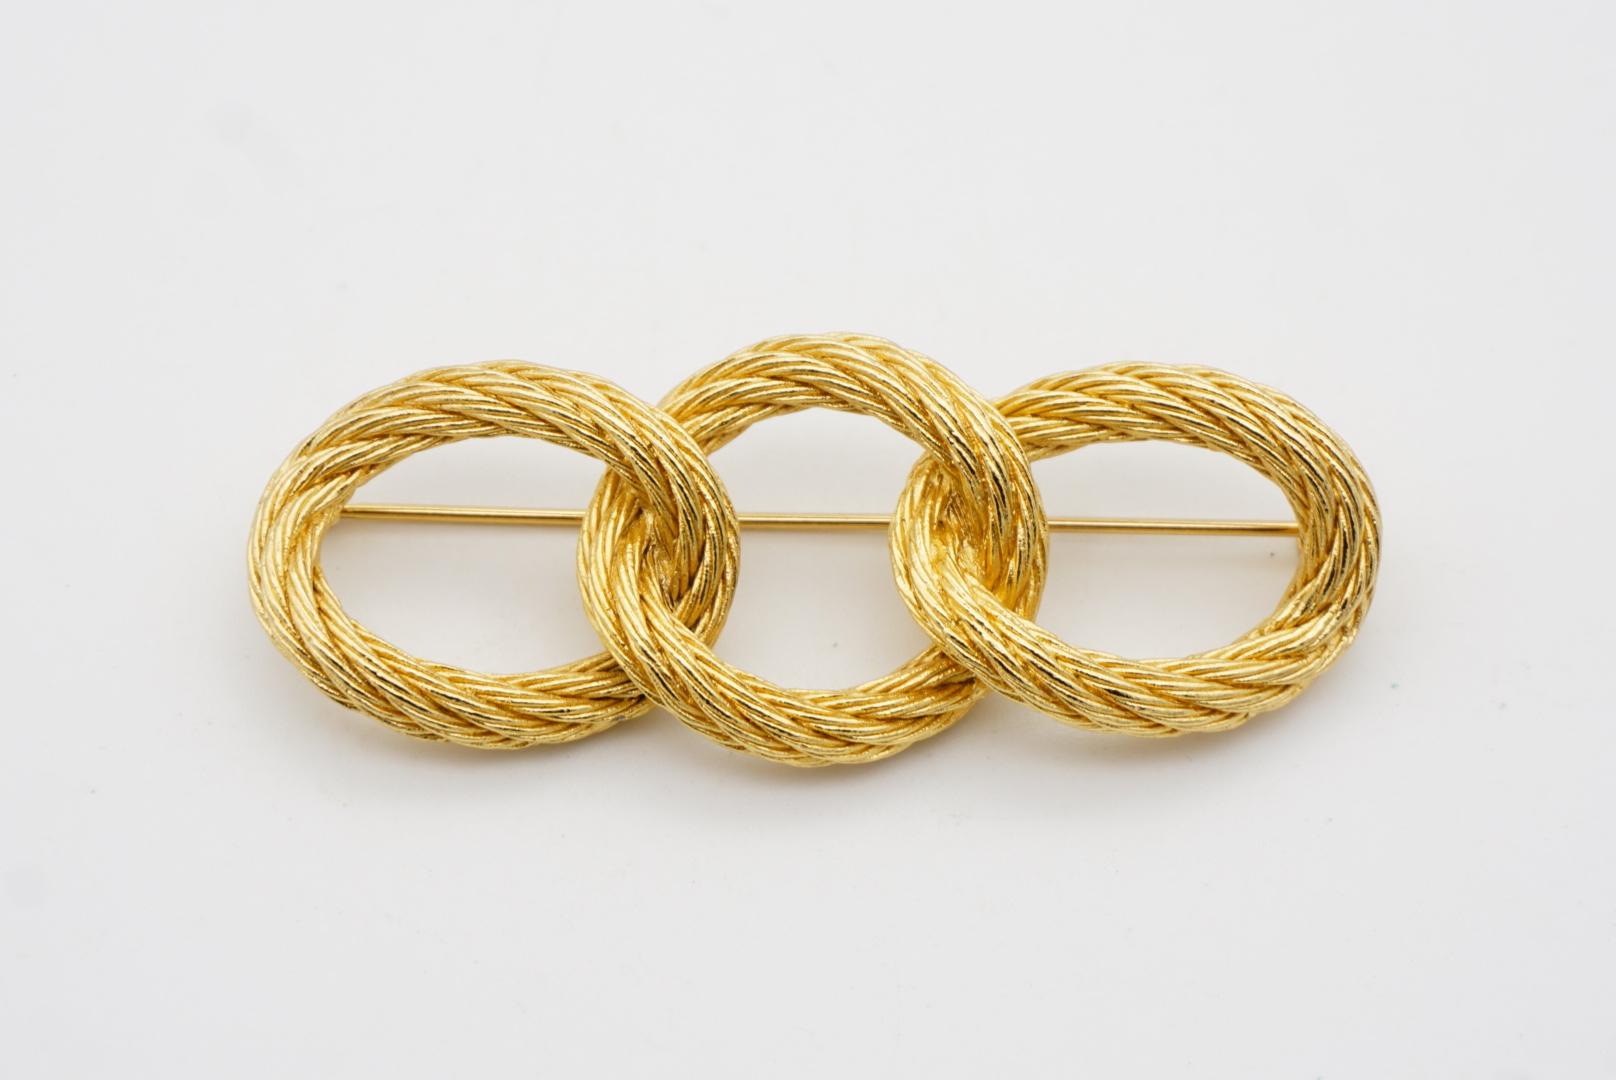 Christian Dior 1980s Vintage Large Trio Oval Interlocked Rope Twist Knot Brooch For Sale 3